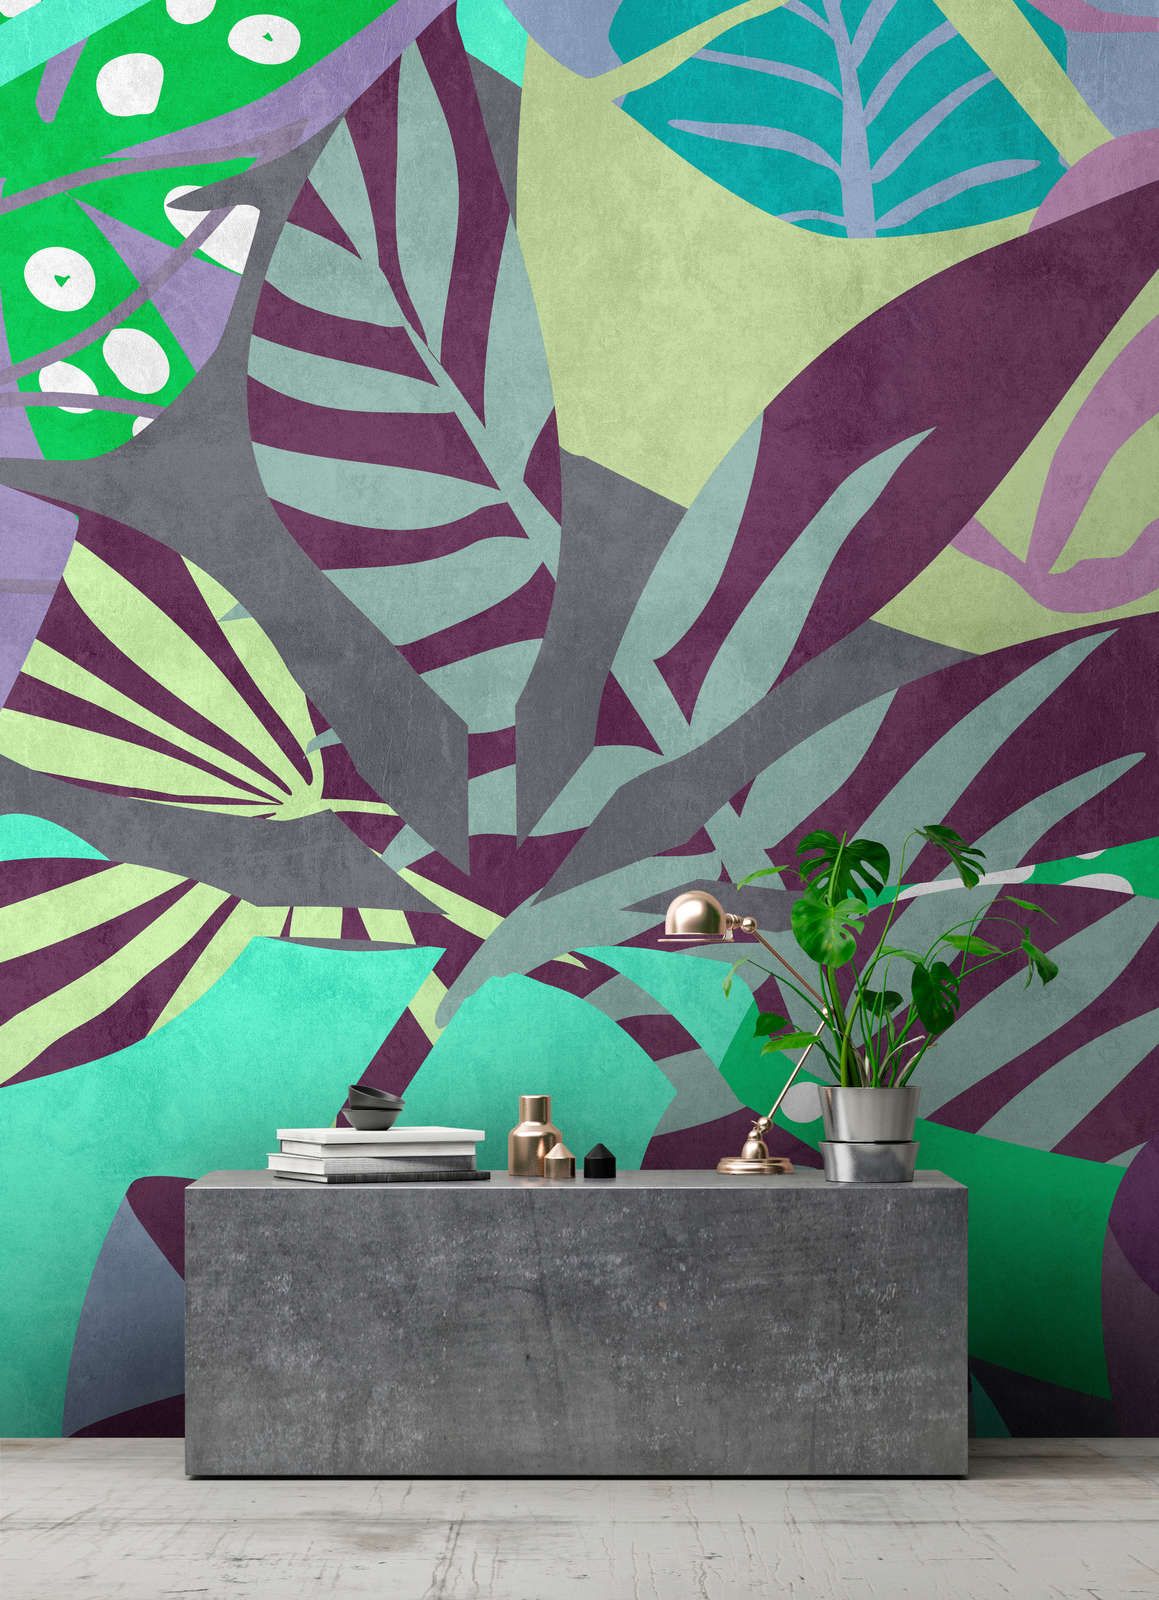             Photo wallpaper »anais 2« - Abstract leaves on concrete plaster texture - Purple, Green | Smooth, slightly shiny premium non-woven fabric
        